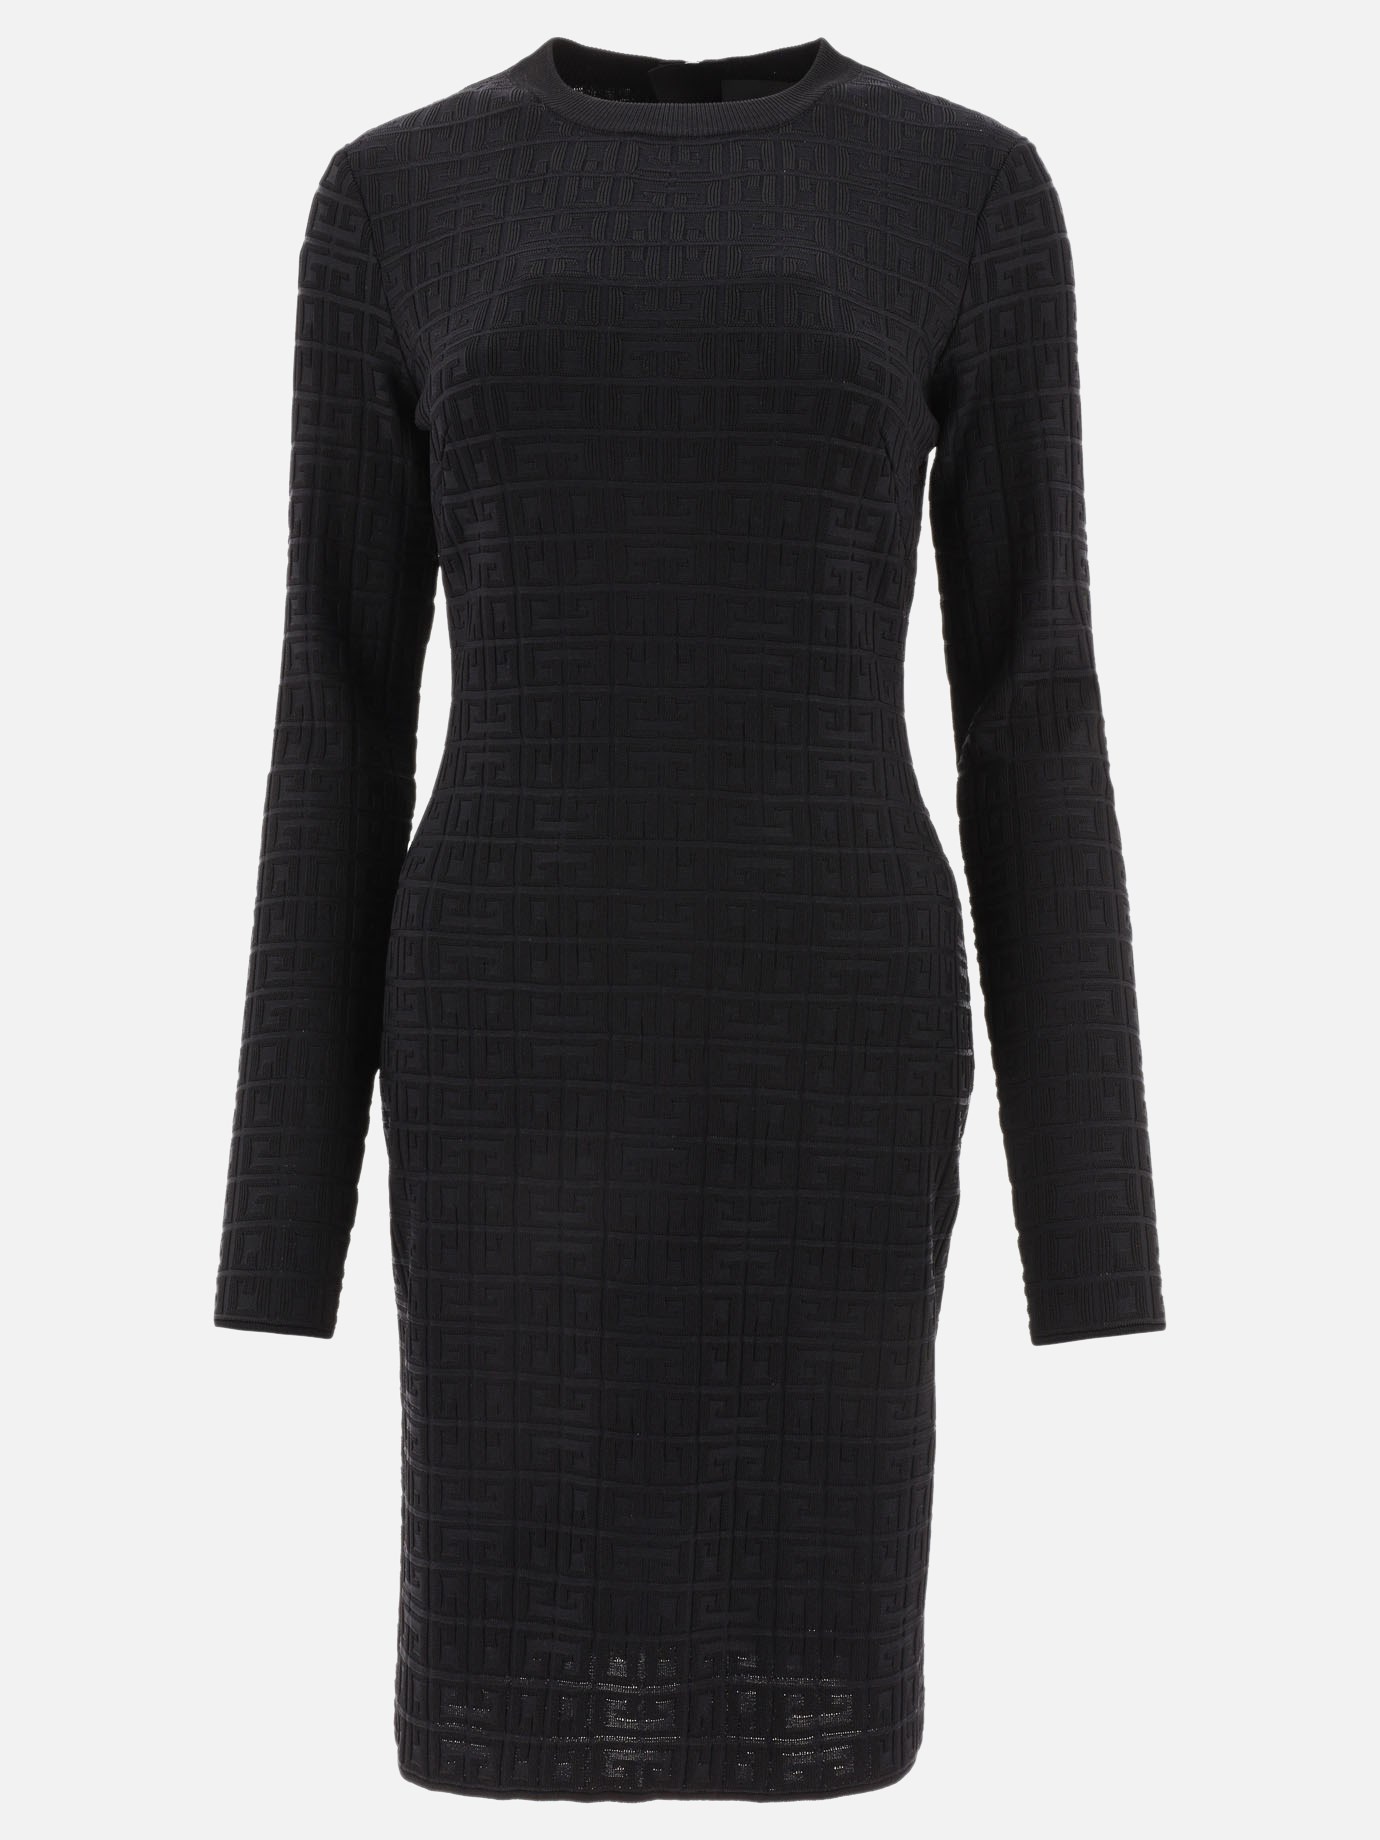  4G  knit dressby Givenchy - 3